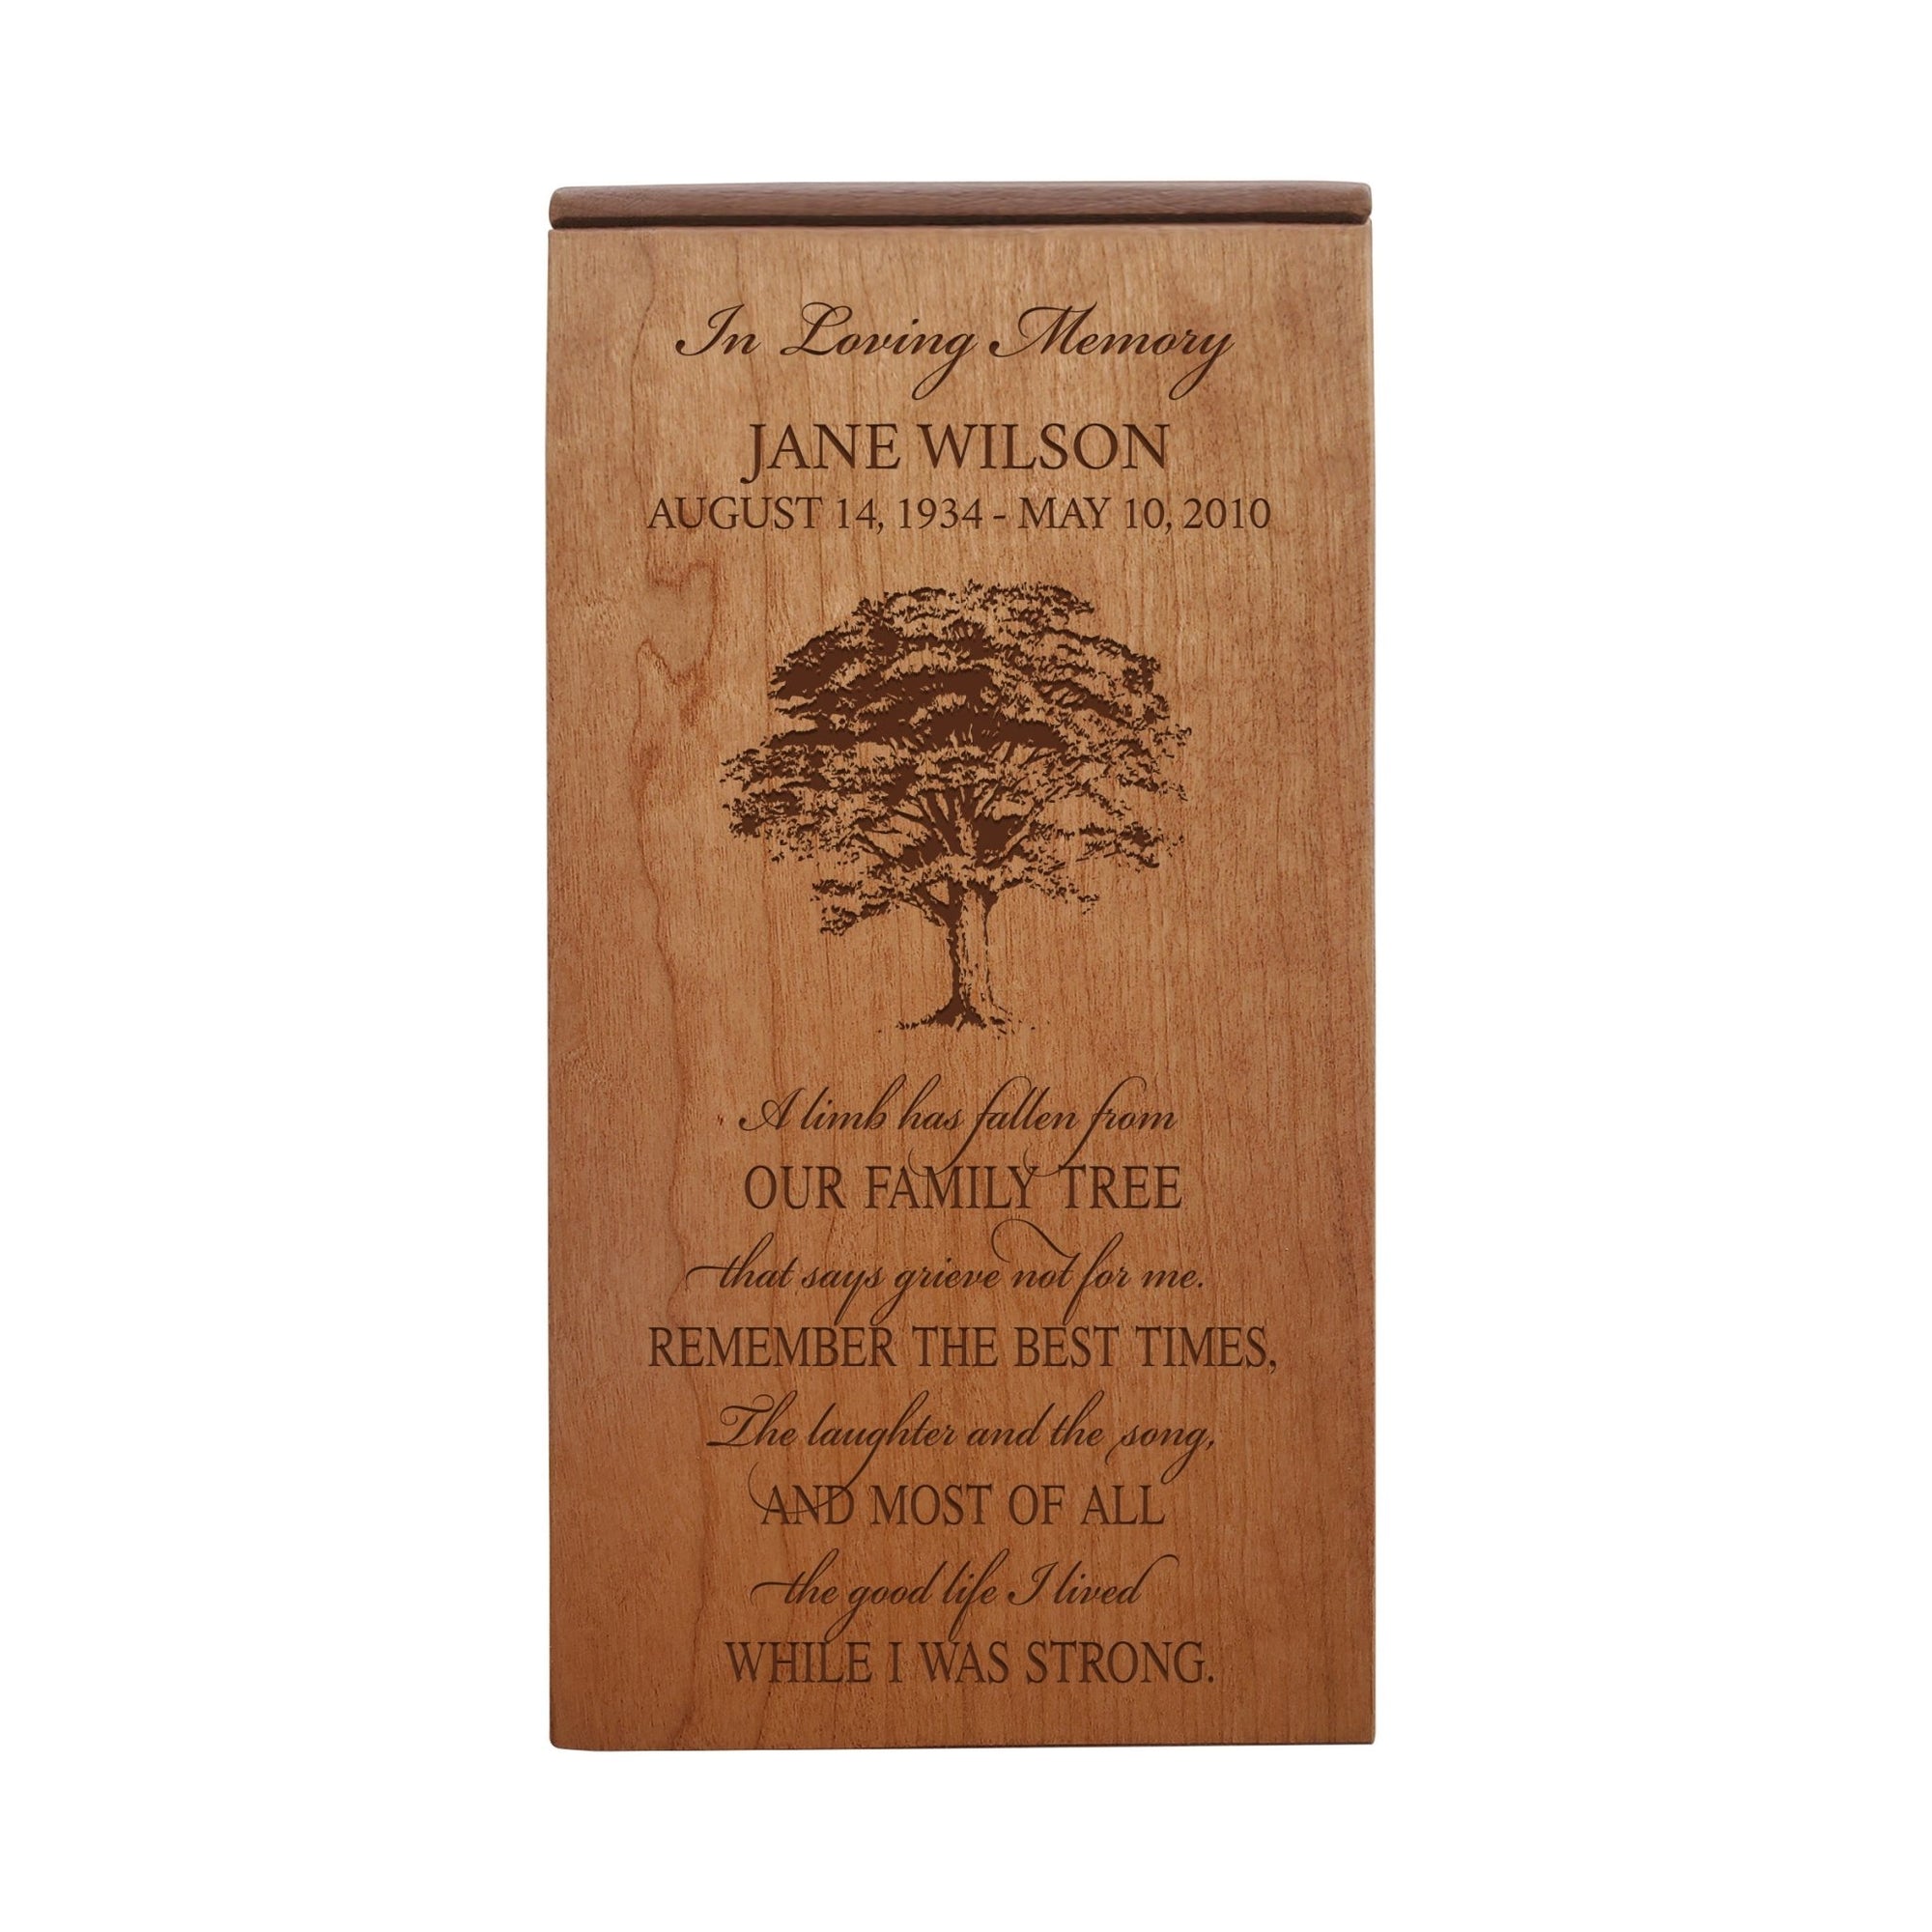 Custom Engraved Memorial Cremation Keepsake Urn Box Holds 100 Cu Inches Of Human Ashes A Limb Has Fallen - LifeSong Milestones